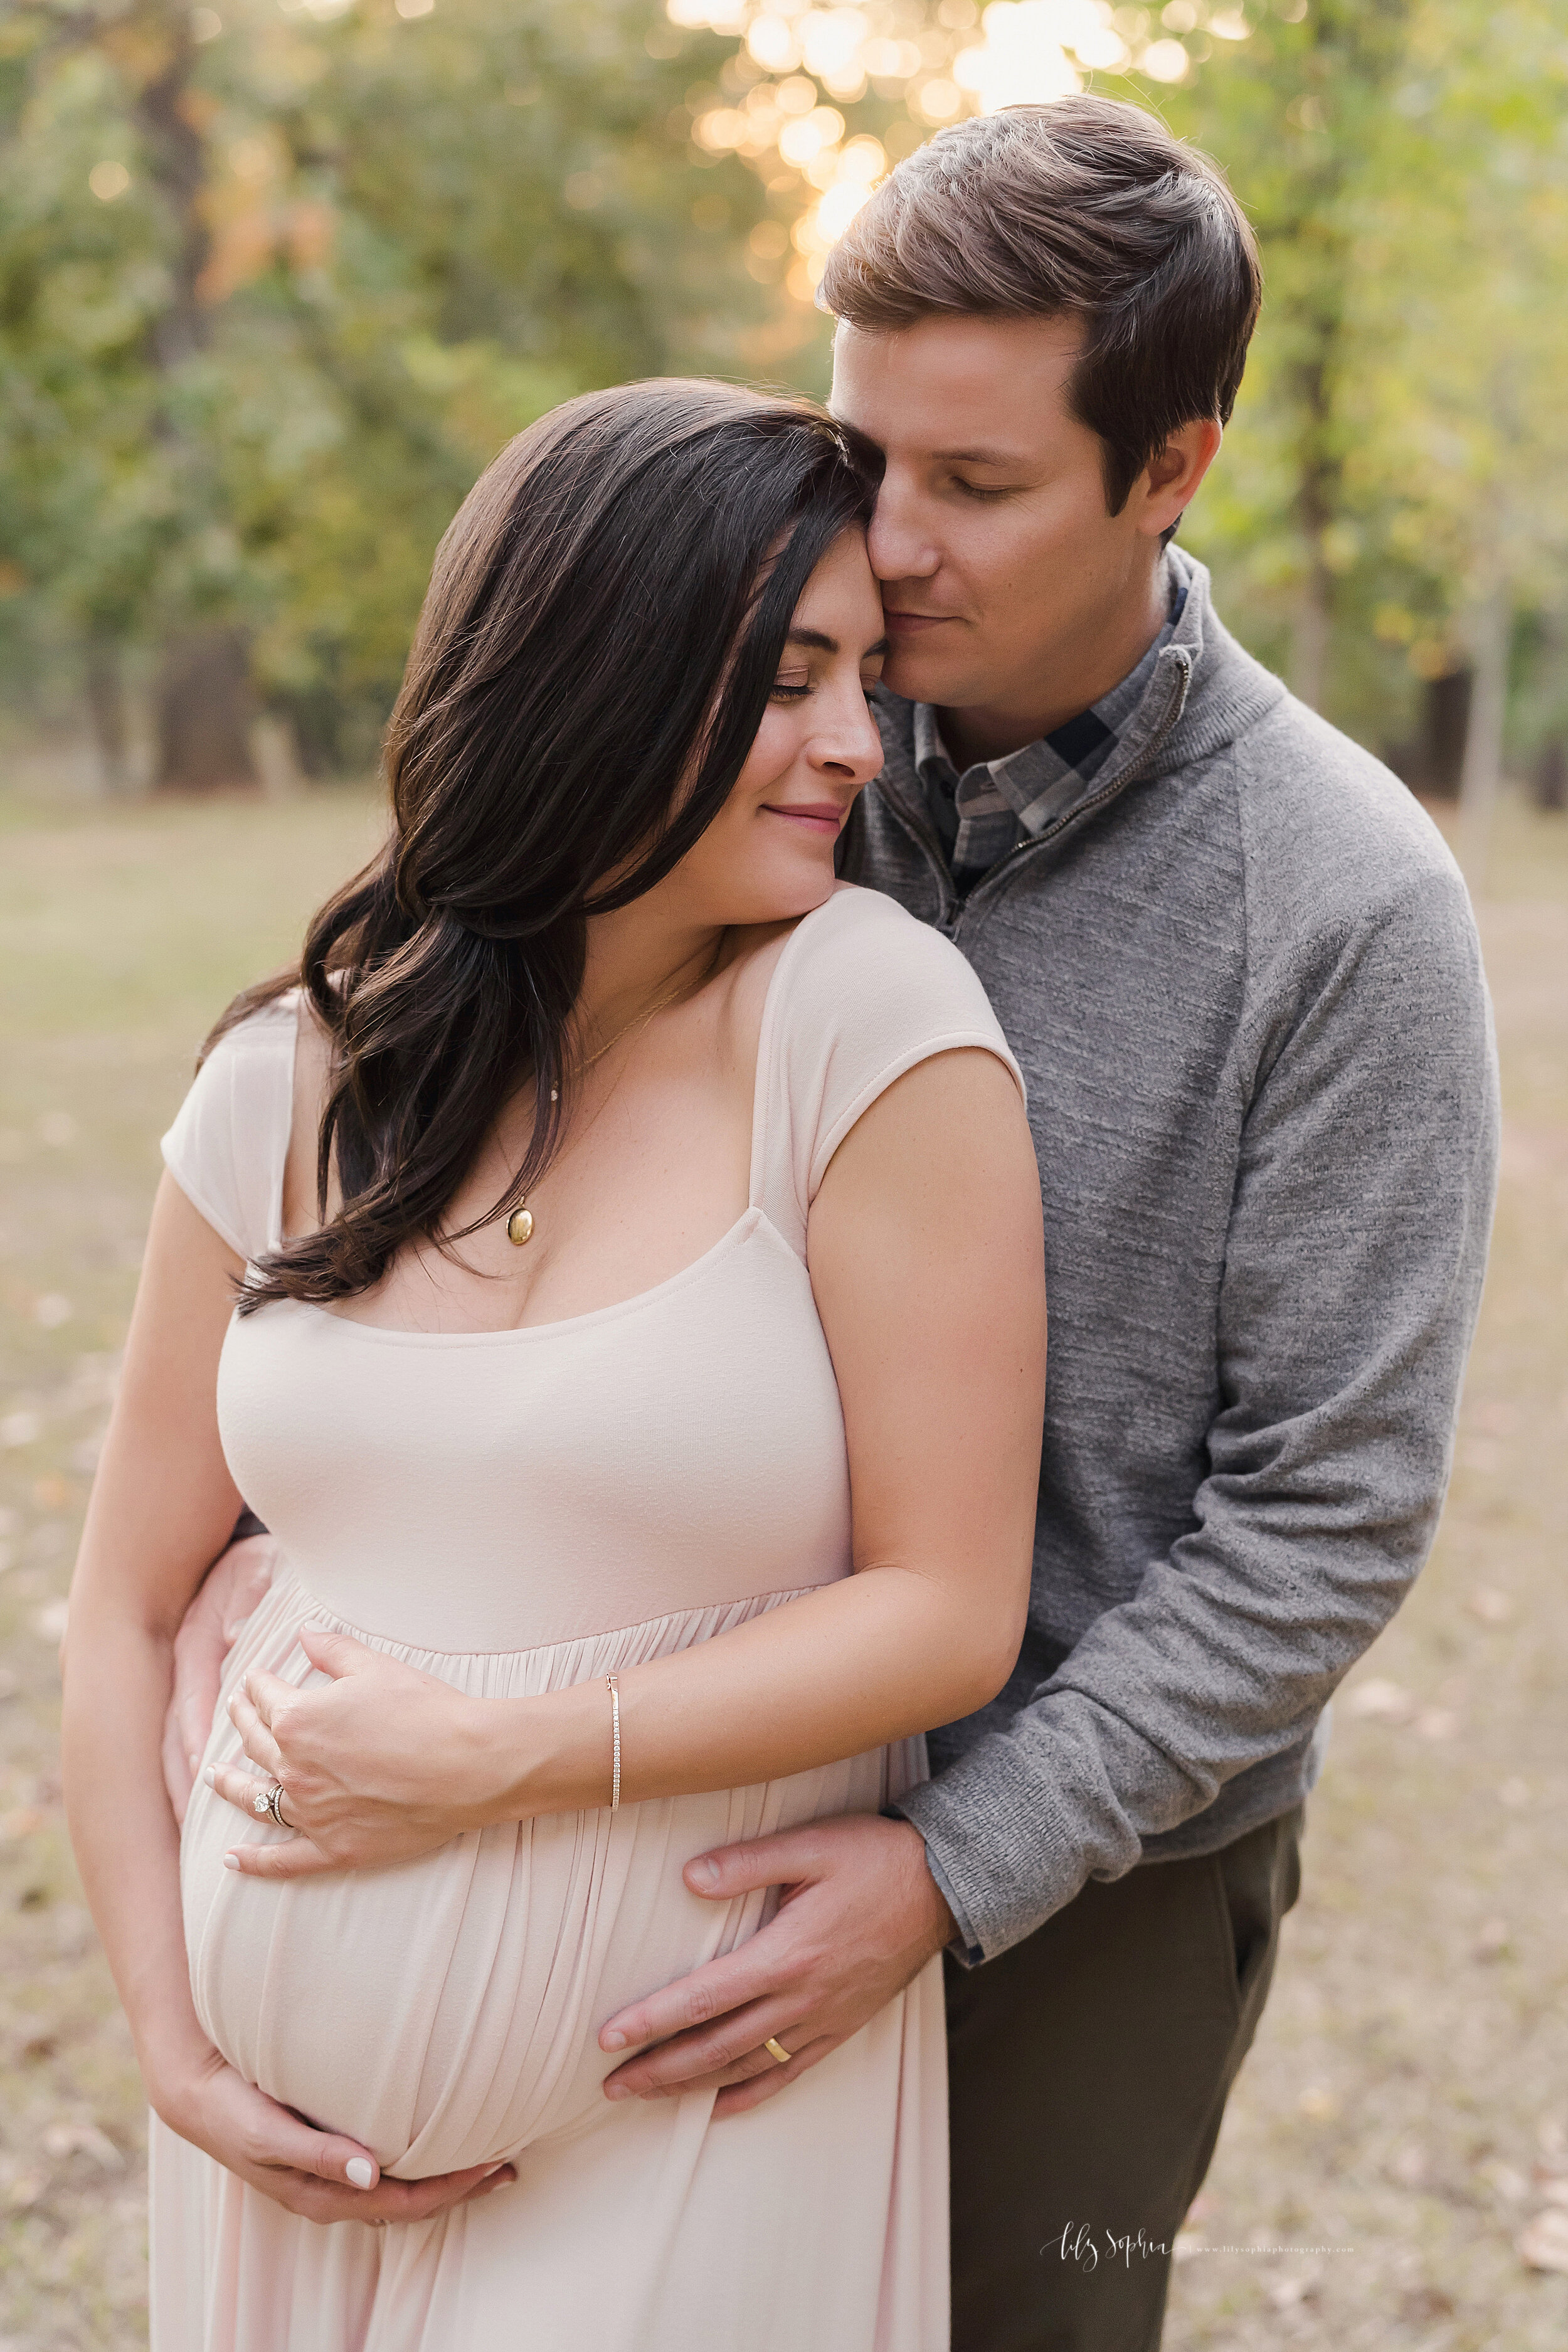  Maternity photo of a husband and wife as they stand in a park at sunset with the husband standing behind his wife and wrapping his hands around her to touch their child in utero and placing his head against his wife’s forehead as they treasure this 